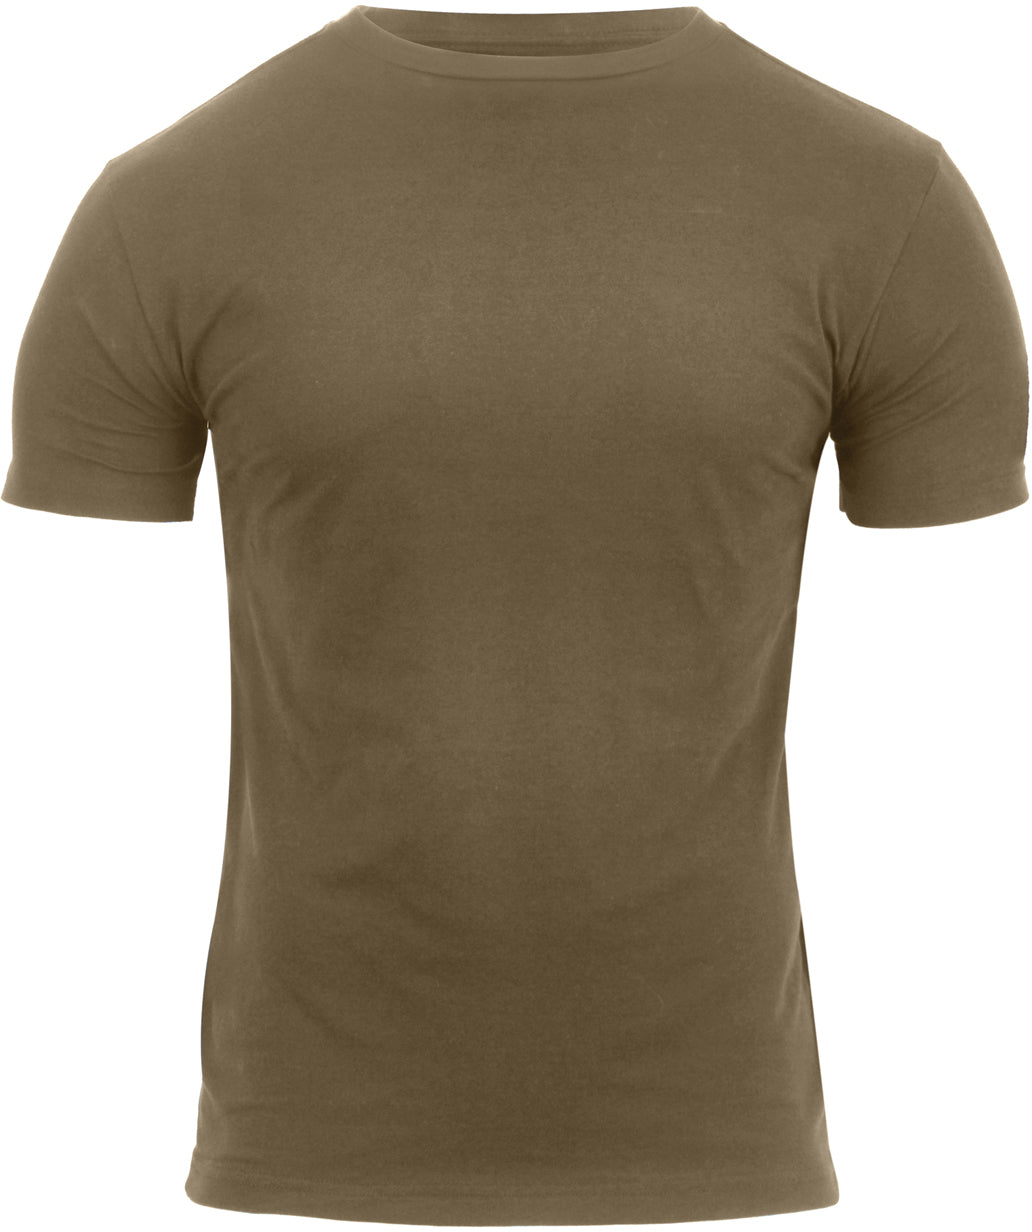 Coyote Brown - Athletic Fit Solid Color Military T-Shirt